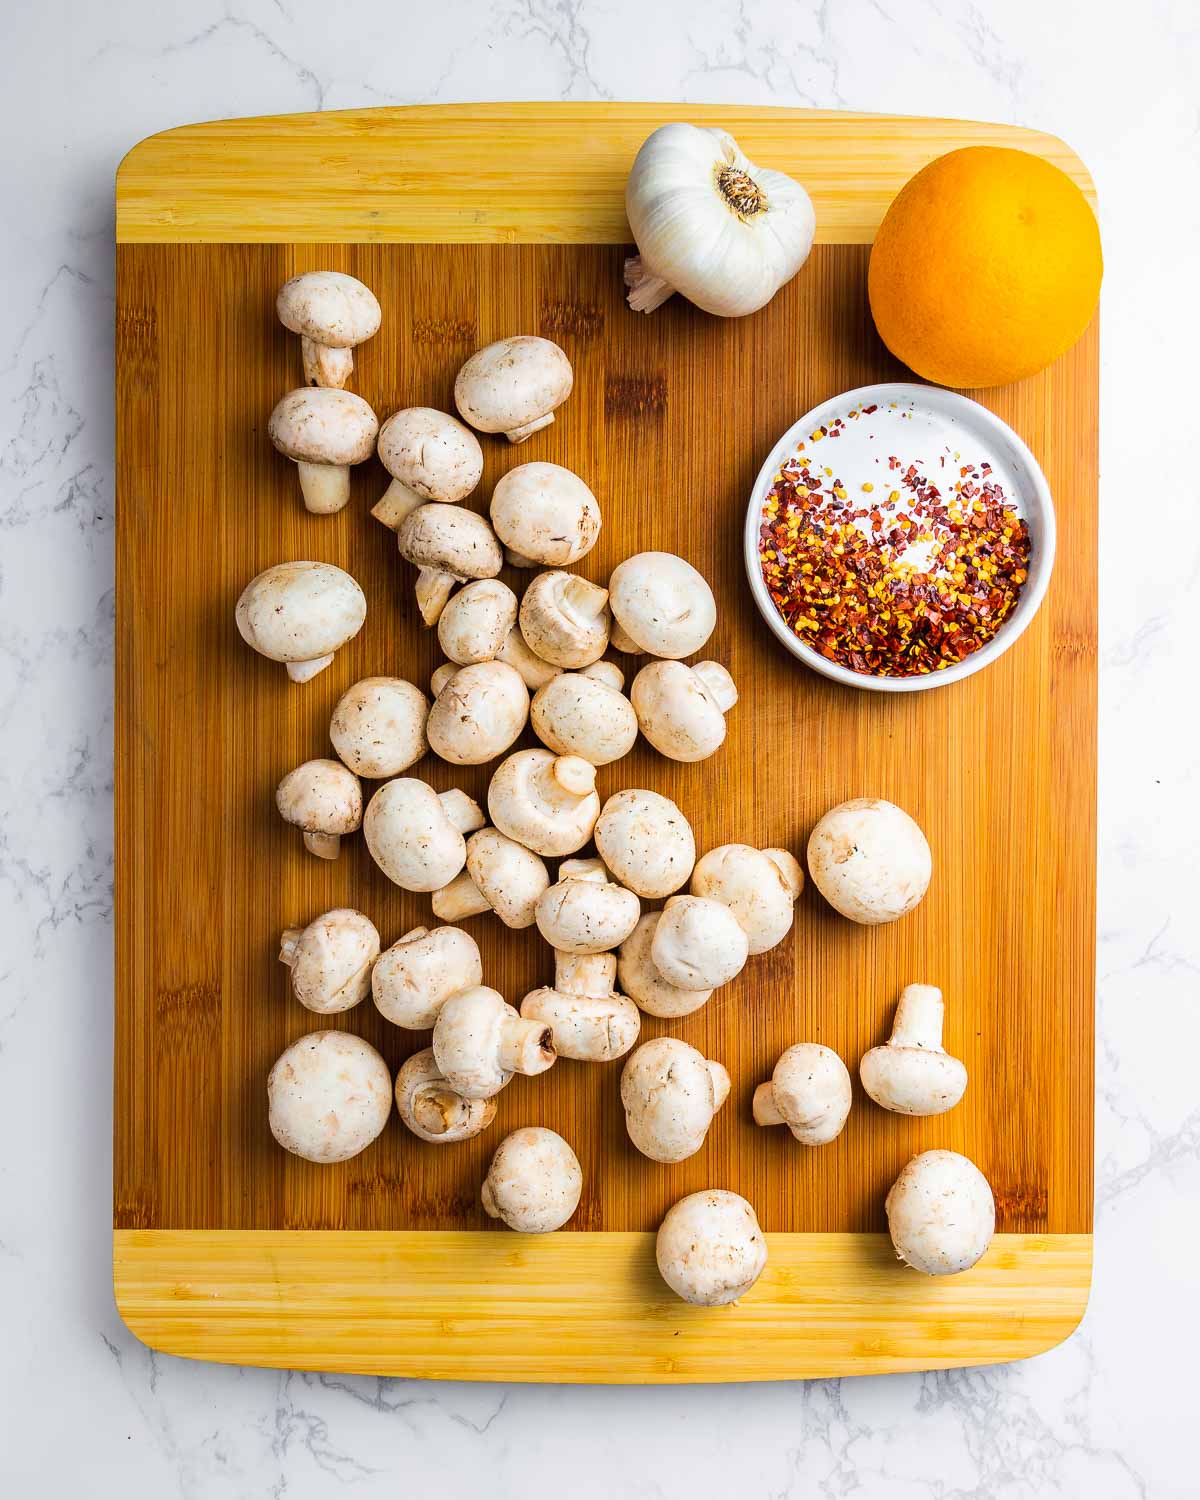 Ingredients shown: white button mushrooms, garlic, hot red pepper, and an orange on wood cutting board.